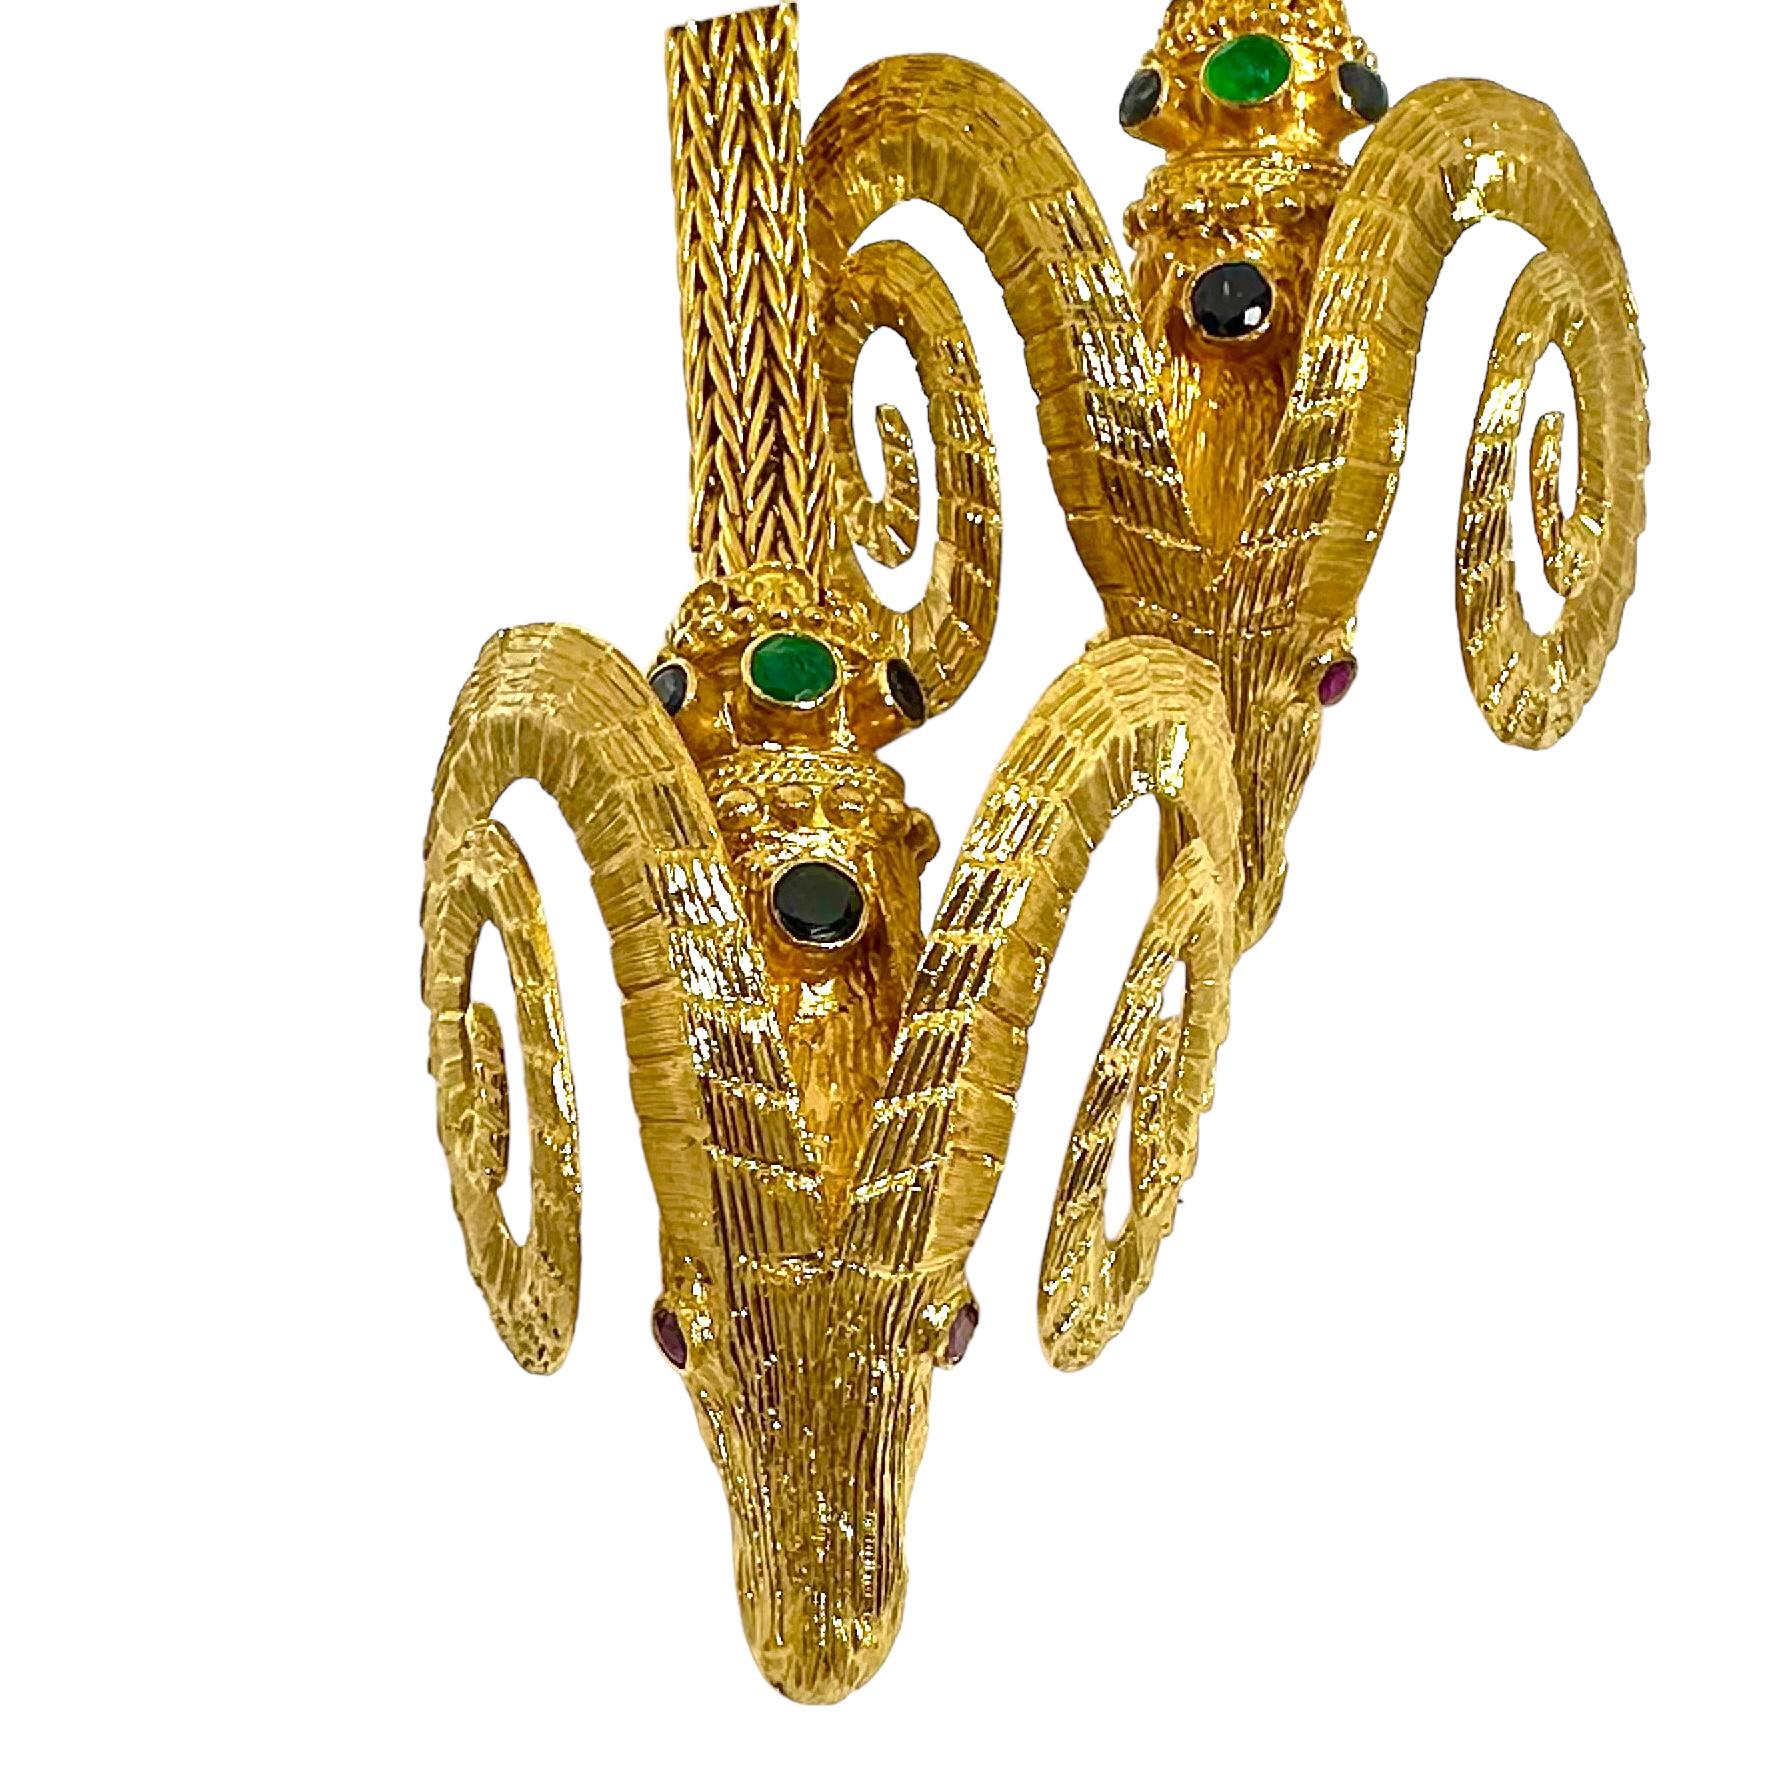 Monumental Scale Lalaounis 18k Gold Double Rams Head Necklace 38 Inches Long For Sale 3